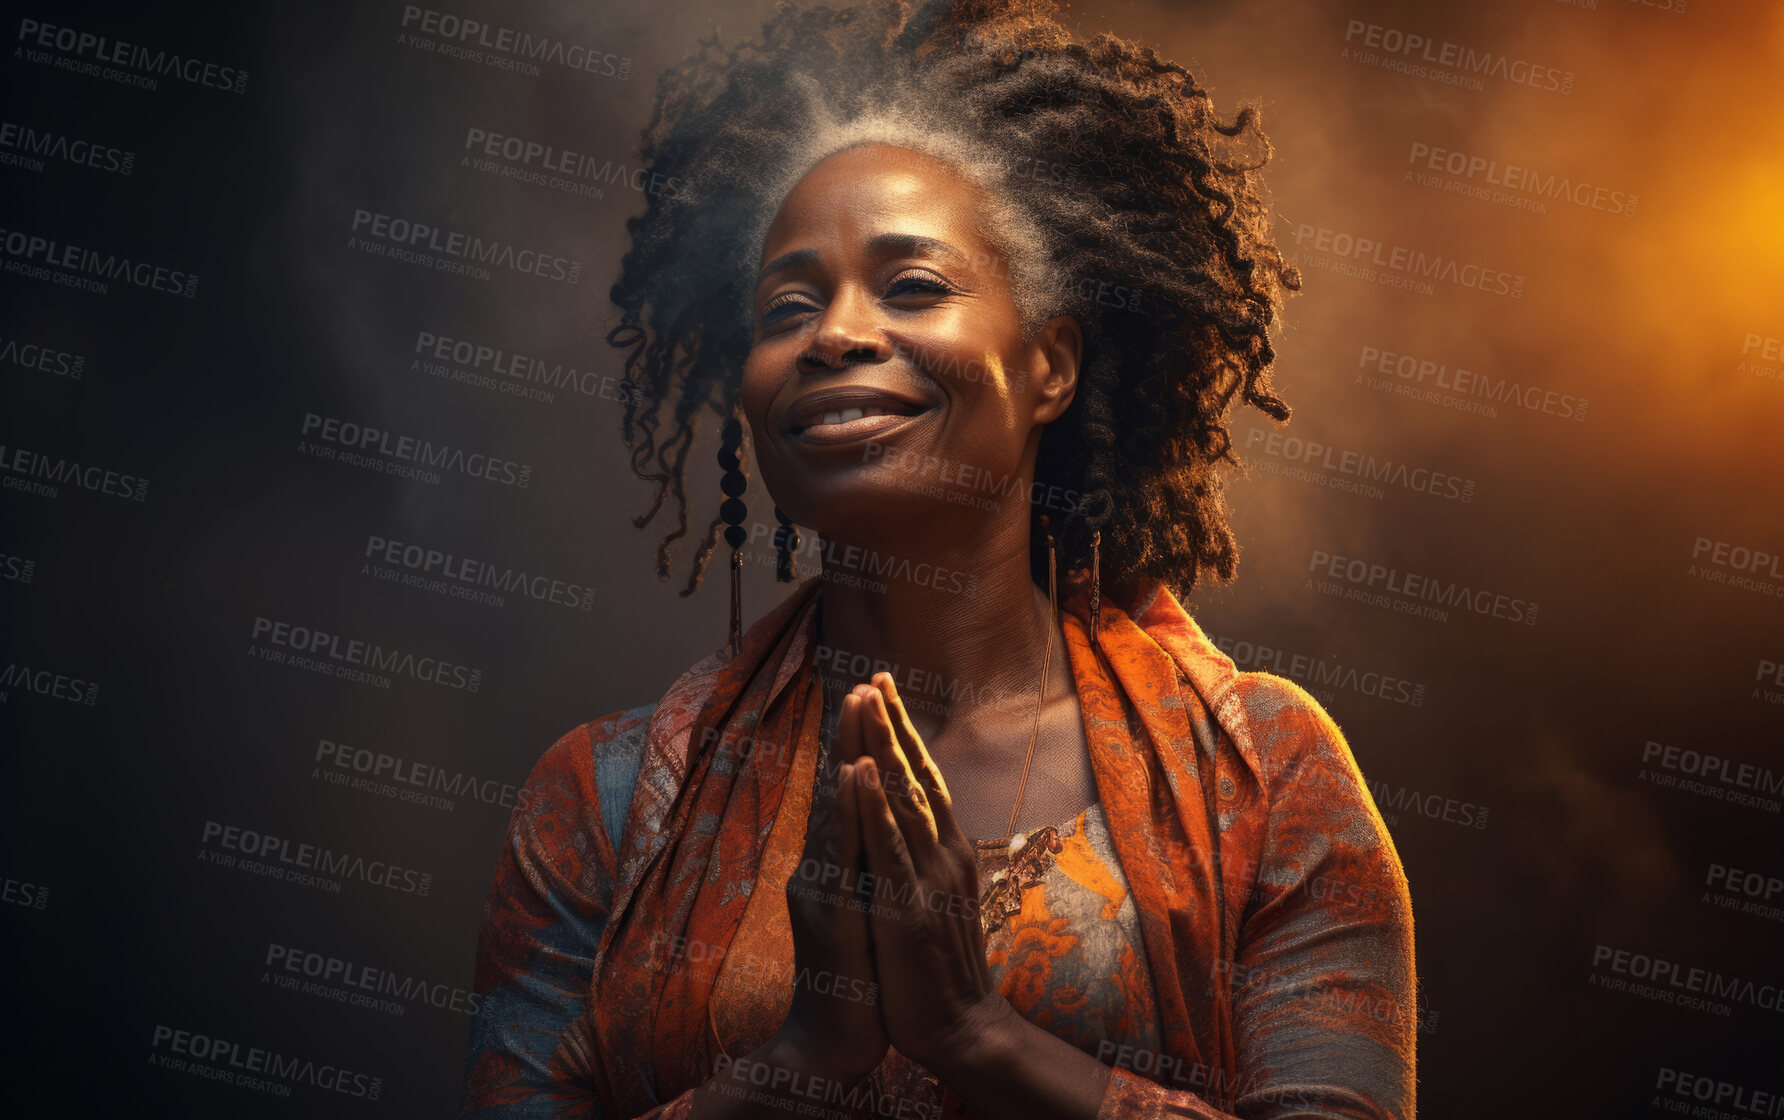 Buy stock photo Senior African American woman smiling while in prayer. Studio backdrop. Religion concept.